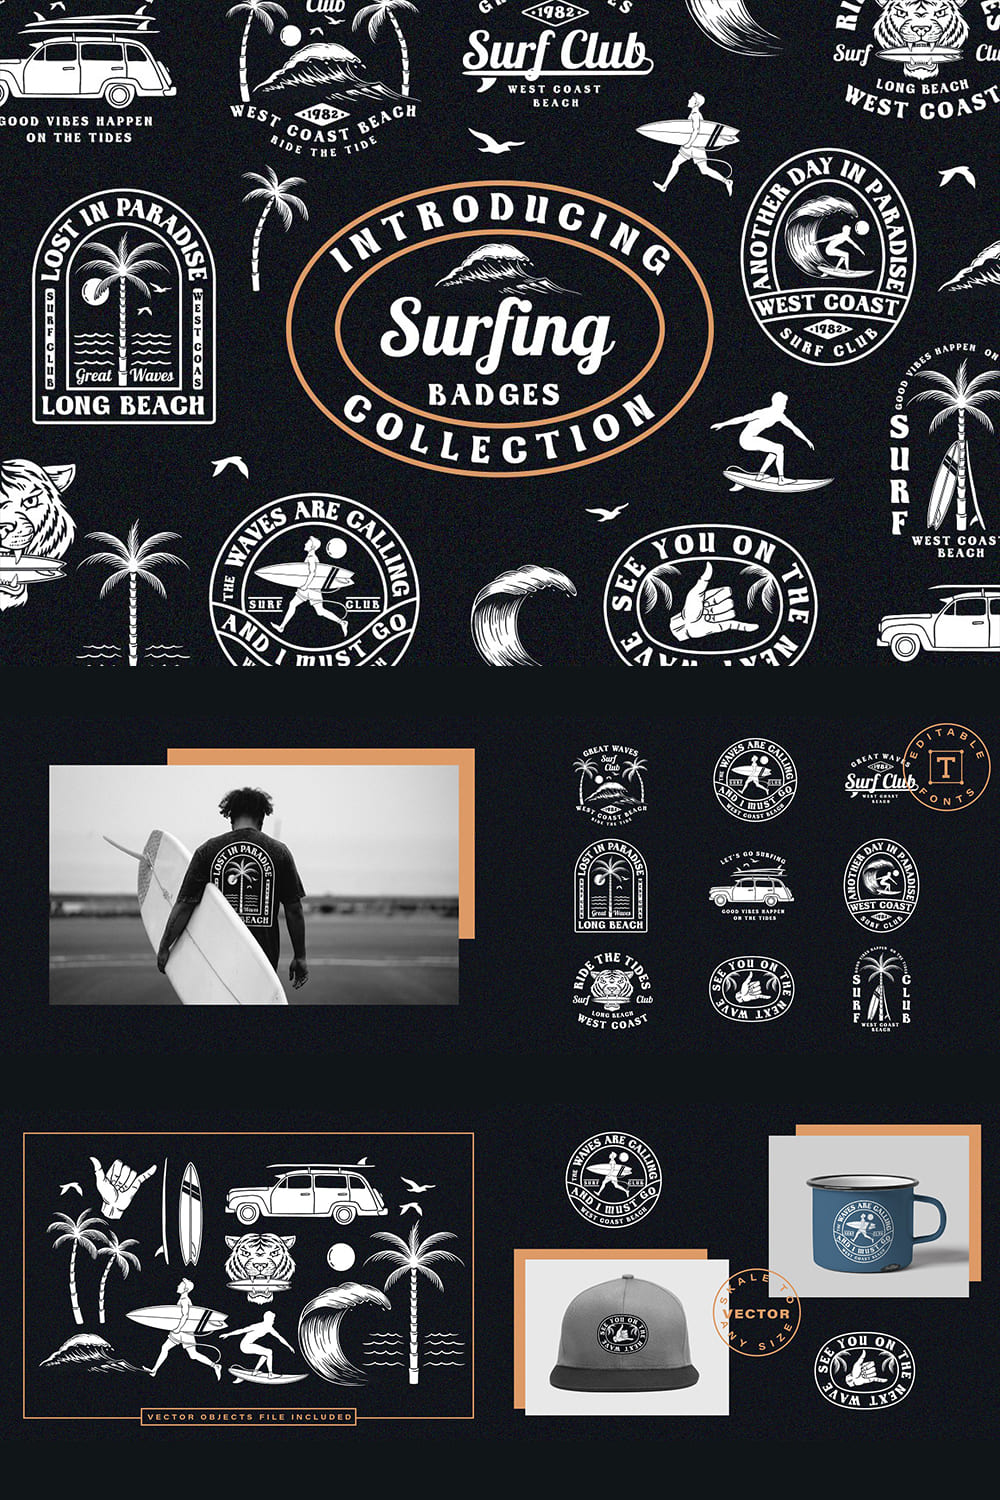 Surfing badges collection Pinterest.